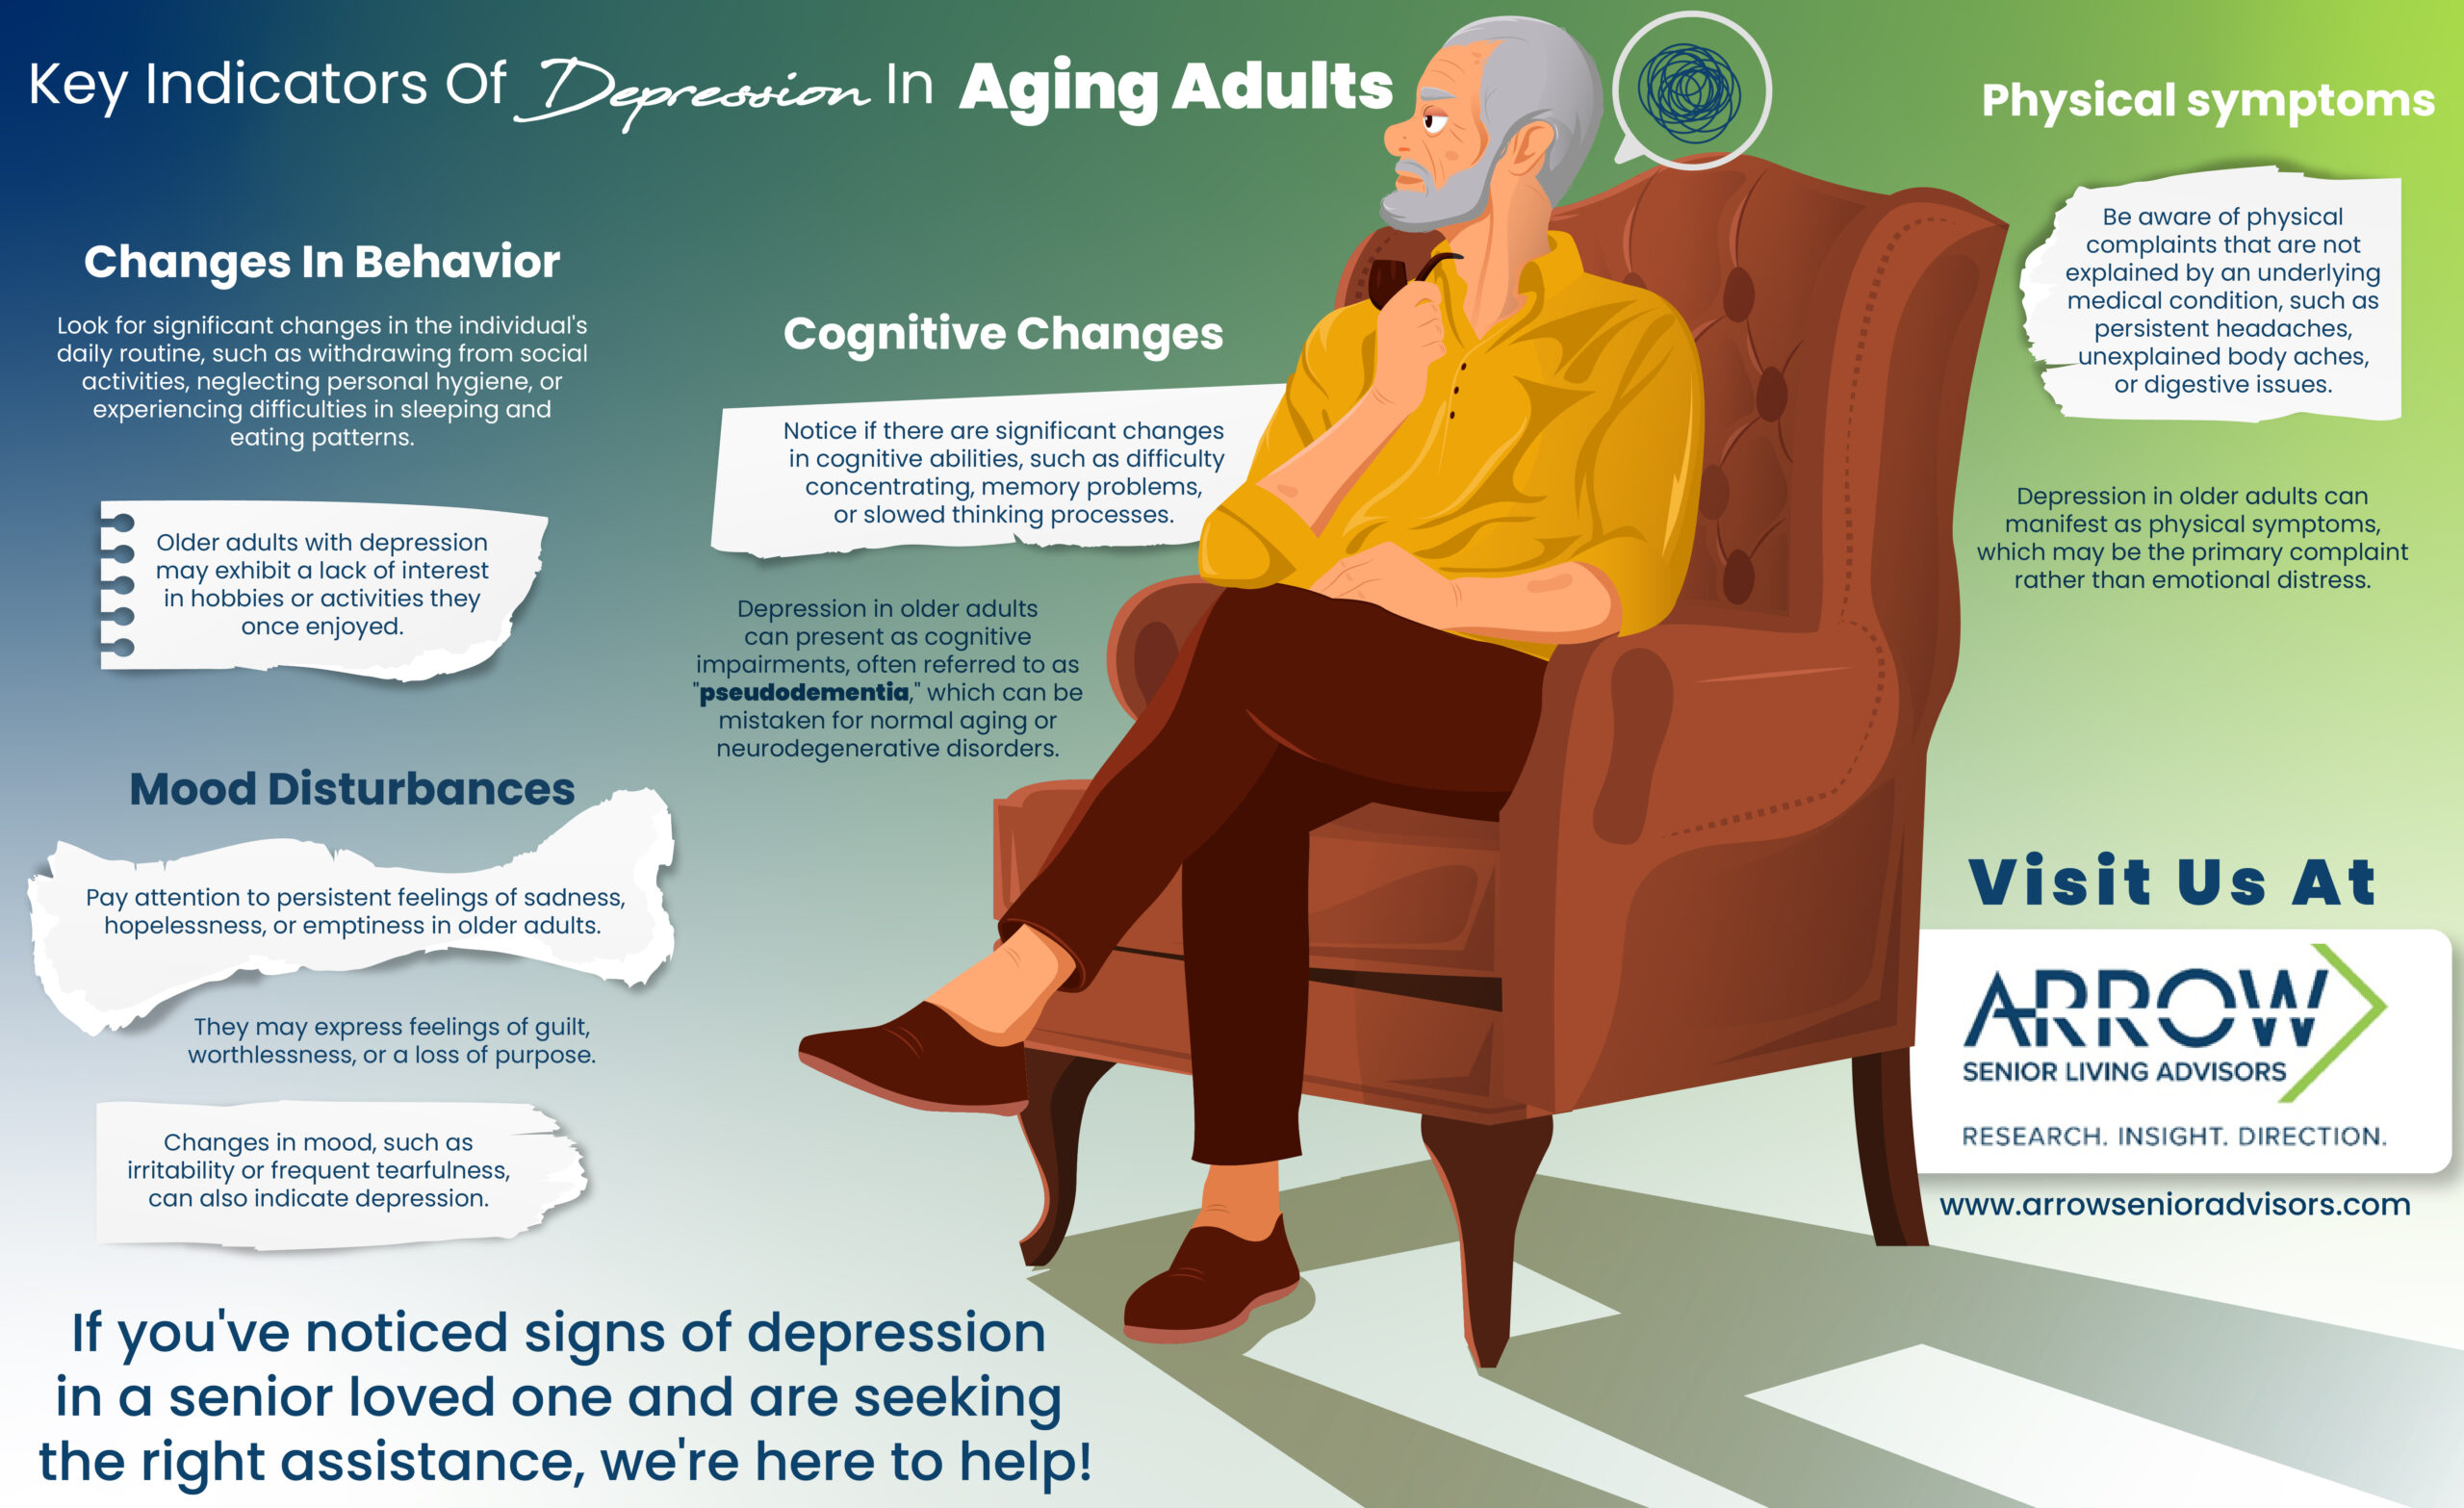 Key Indicators Of Depression In Aging Adults